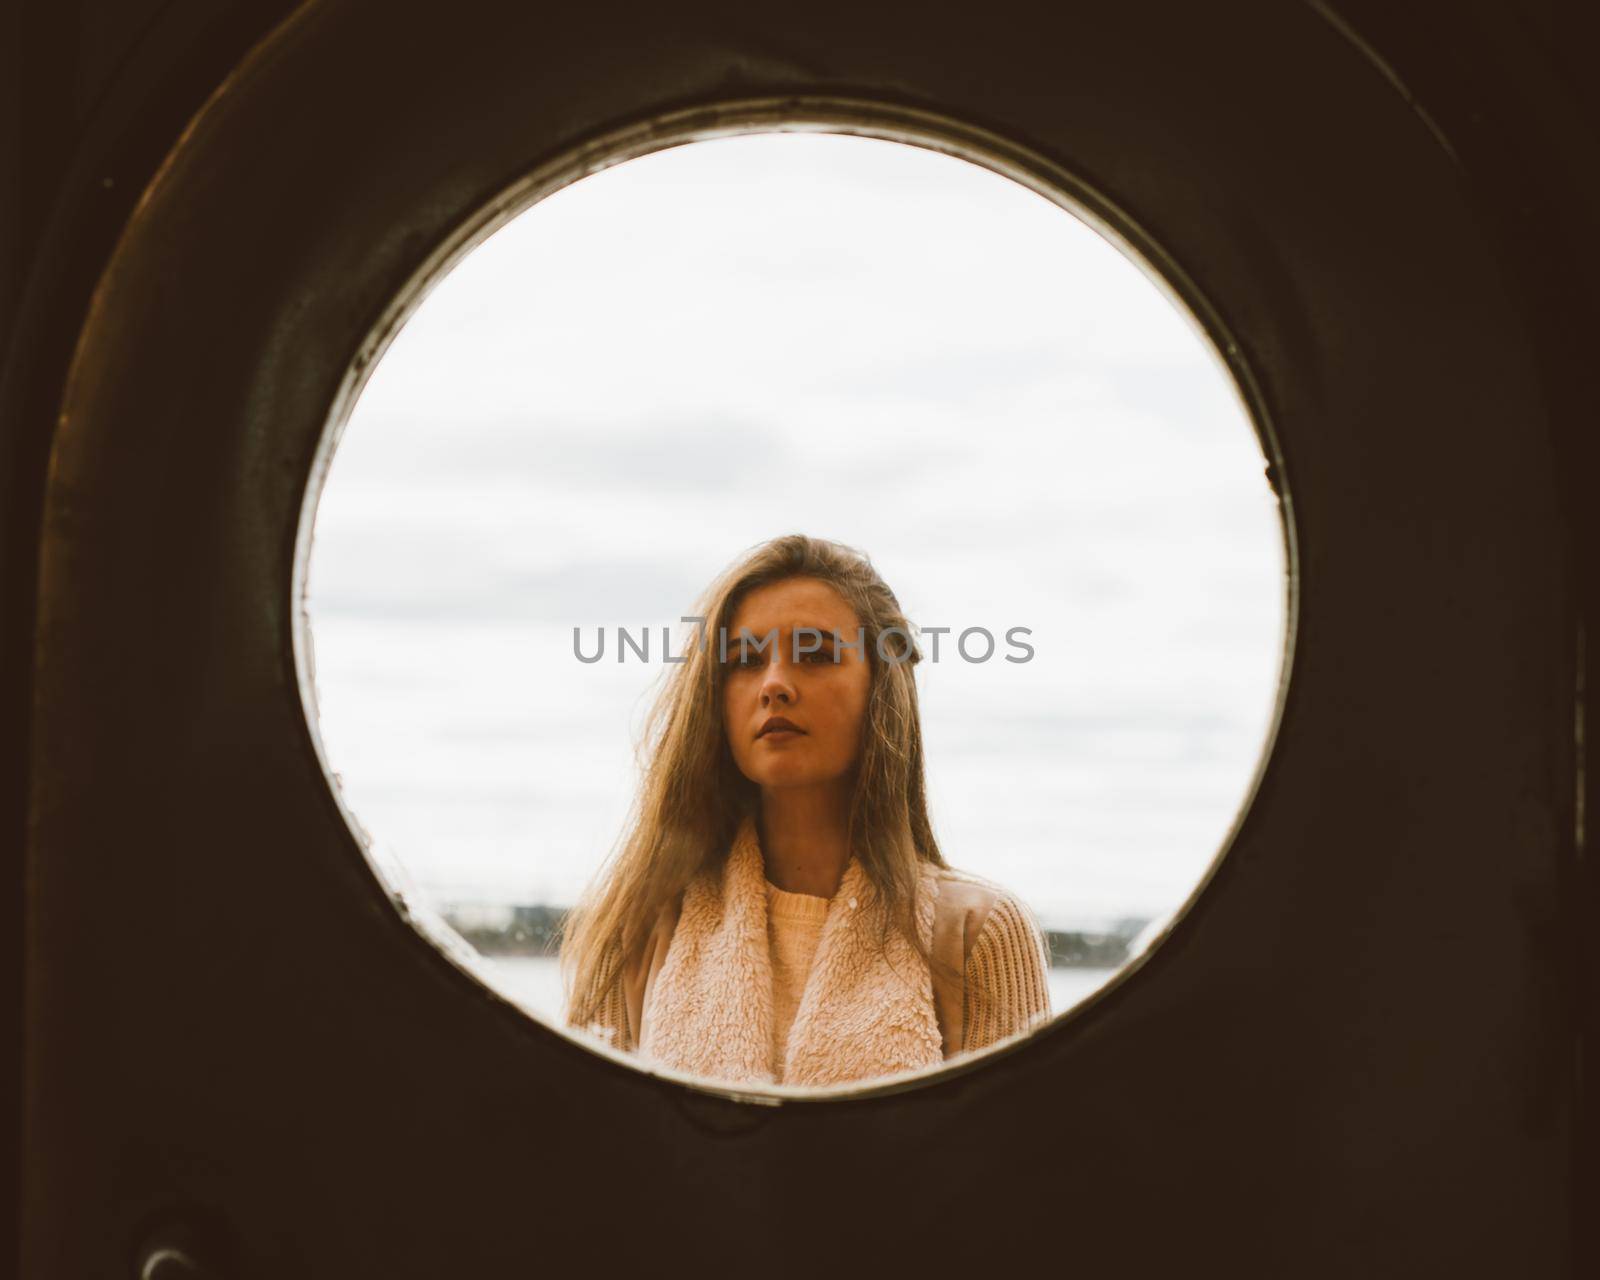 The face of young girl in round frame window on background of sea, ocean, on waterfront. Portrait in circle, backlit by NataBene